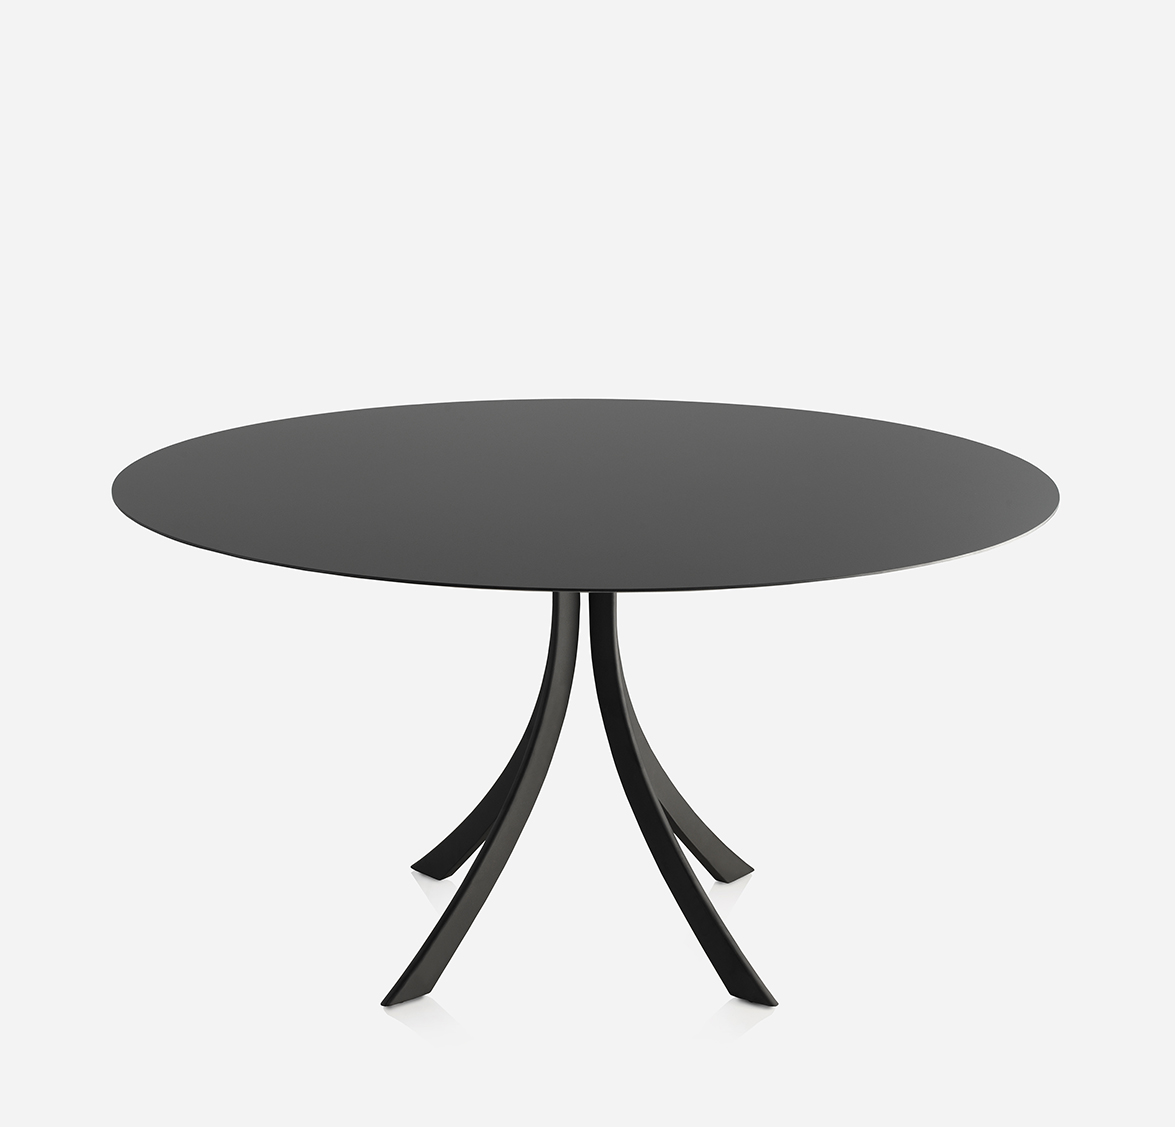 Falcata dining table by Lievore Altherr Molina 06